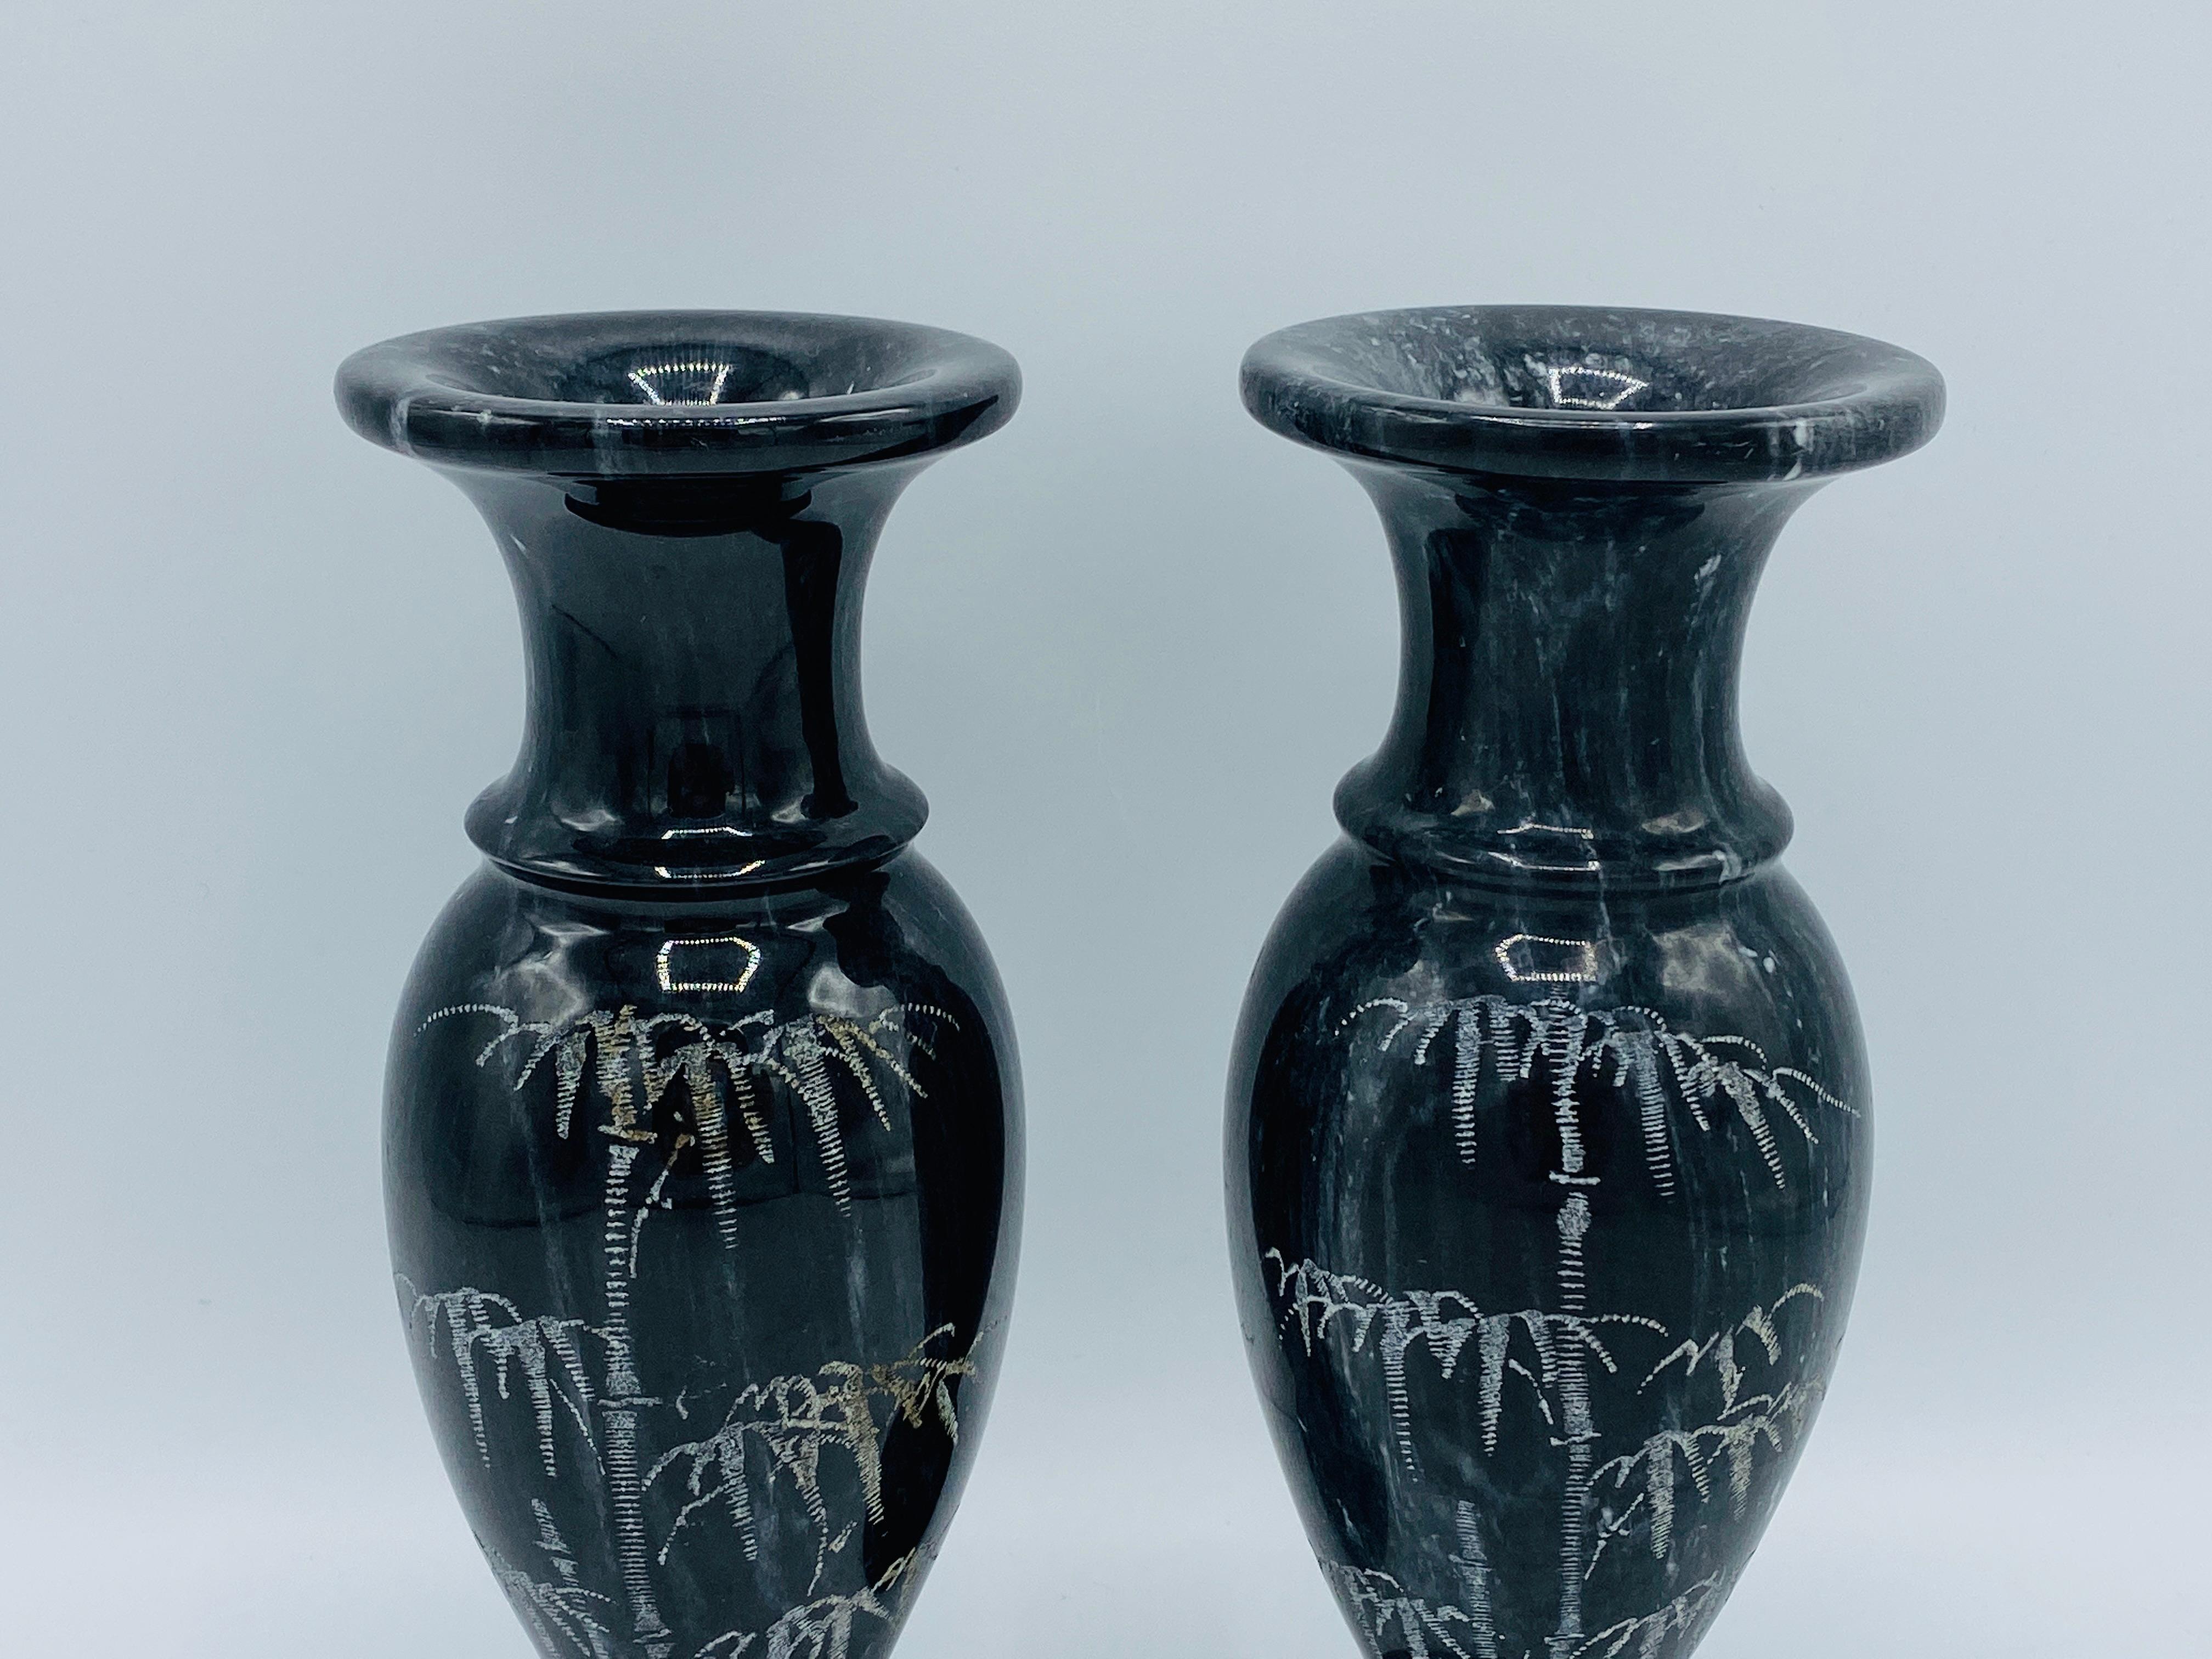 Listed is a stunning, pair of 1960s Italian marble vases. The pair are primarily black with white veining and a bamboo motif etched along one side of each. Heavy, weighing 4.7lbs.